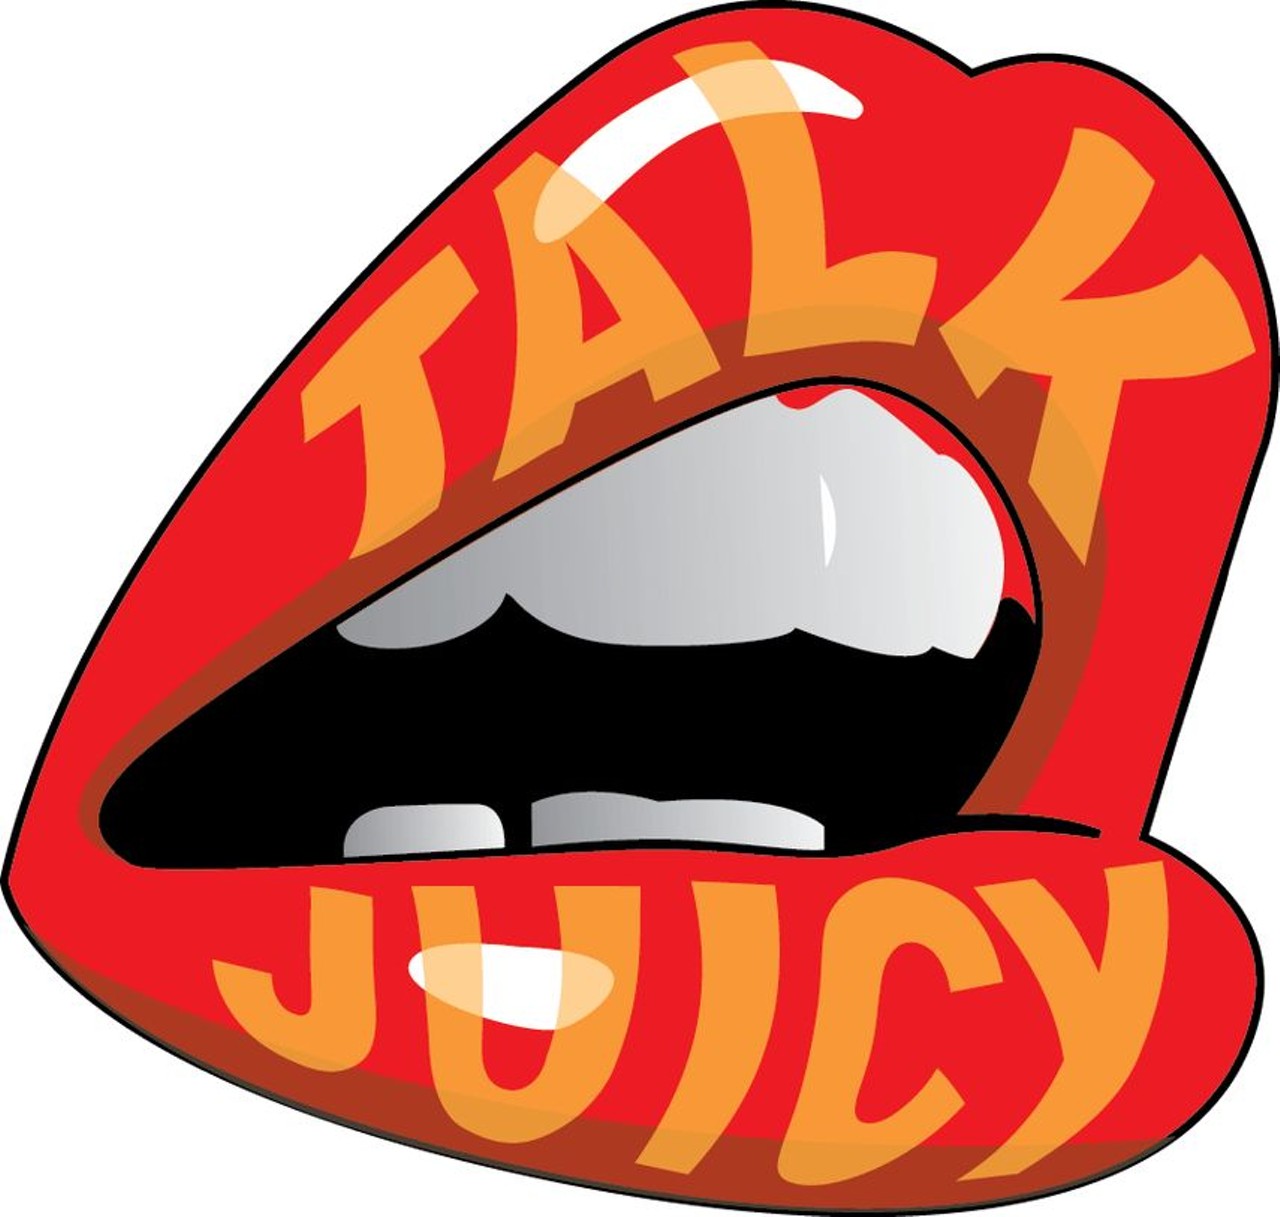  Talk Juicy  
Talk Juicy consists of five friends coming together to chat about motherhood and relationships, and maybe give some advice to callers. Discussions are littered with pop culture references and personal anecdotes. The podcast &#151; produced by Podcast Detroit &#151;  premiered in March 2017. The light-hearted, casual conversations are what have made listeners return month after month. 
Photo via PodcastDetroit.com 